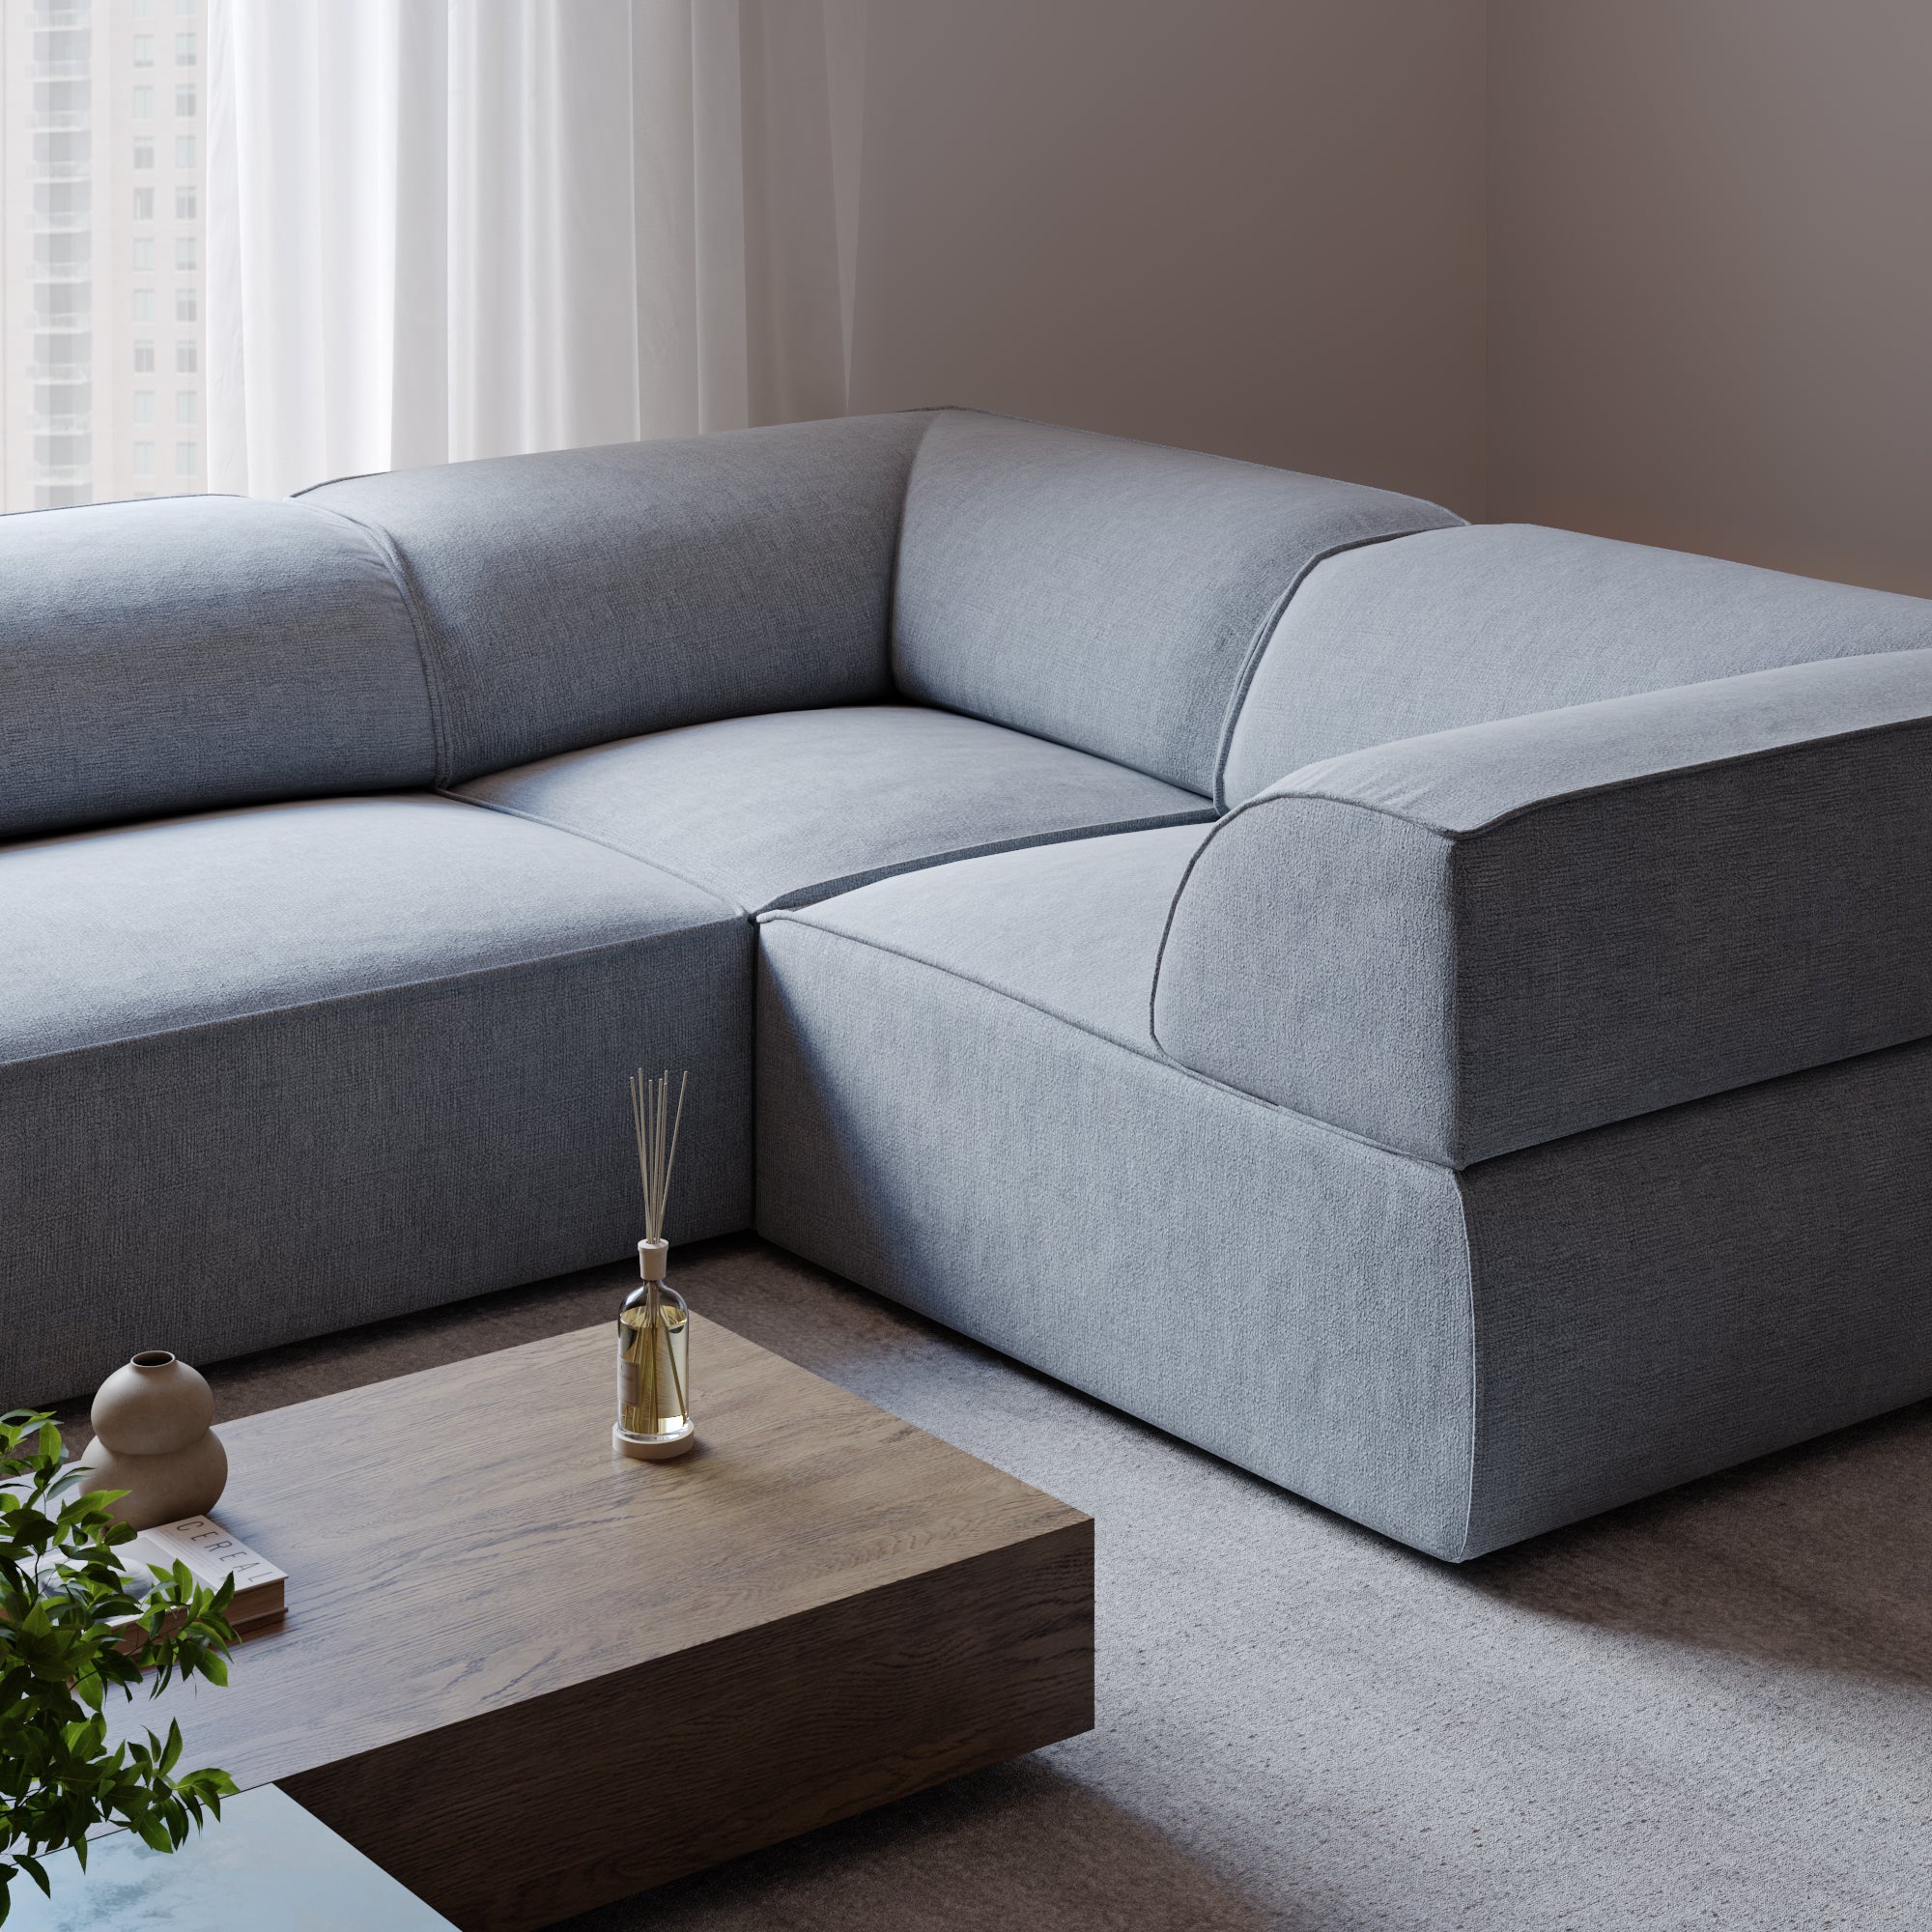 Top 5 Benefits of Shopping European-Made Sofas: Direct-to-Consumer Approach